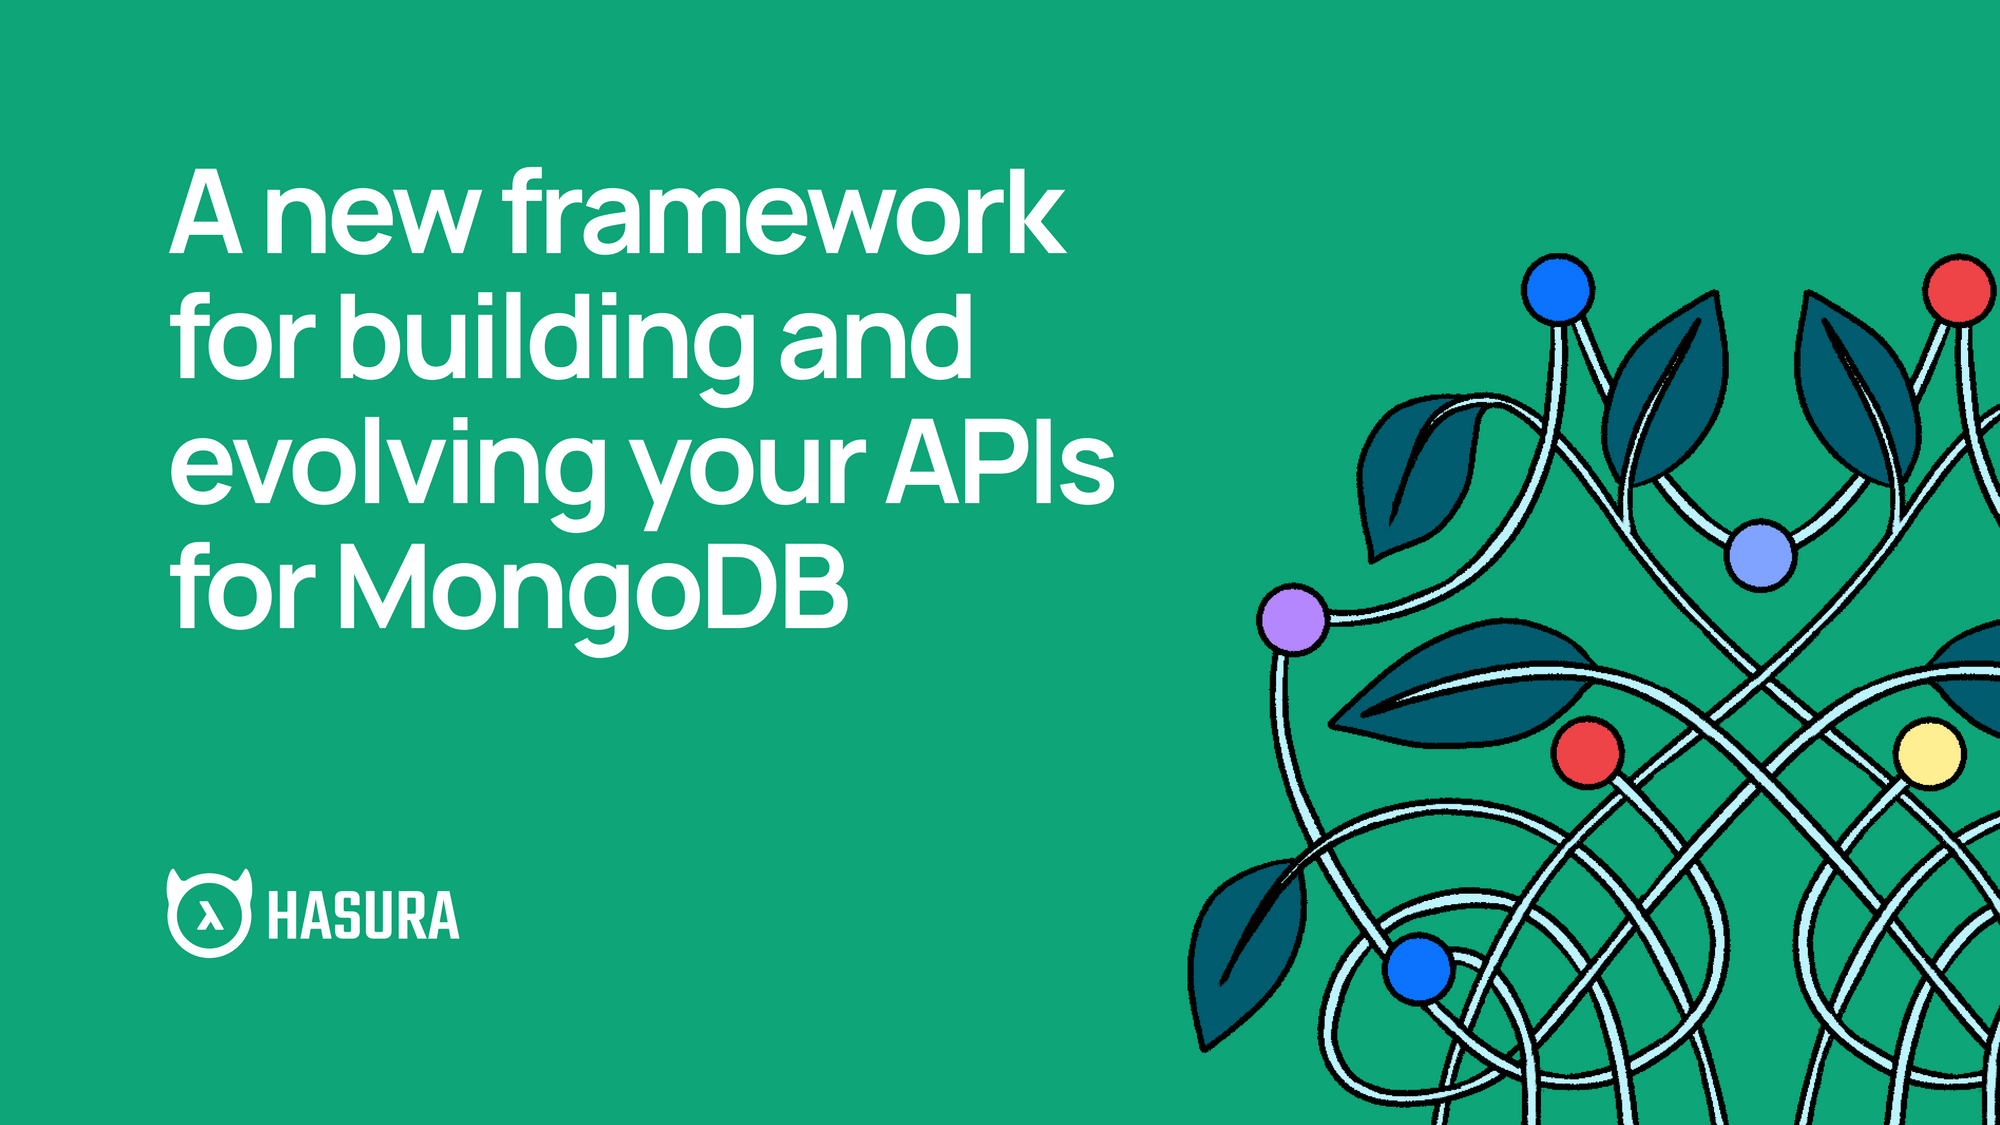 A new framework for building and evolving your APIs for MongoDB